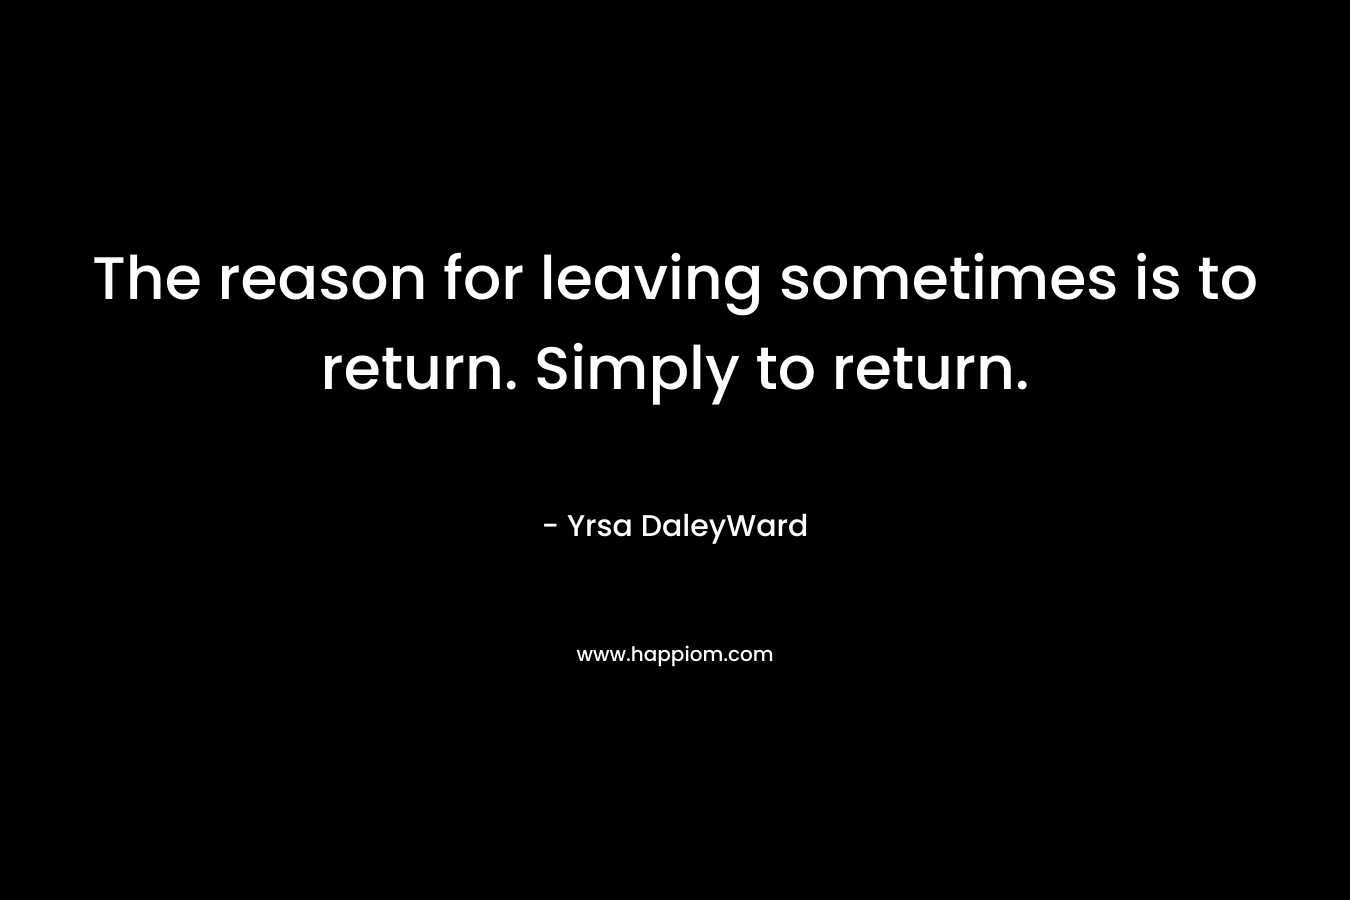 The reason for leaving sometimes is to return. Simply to return.